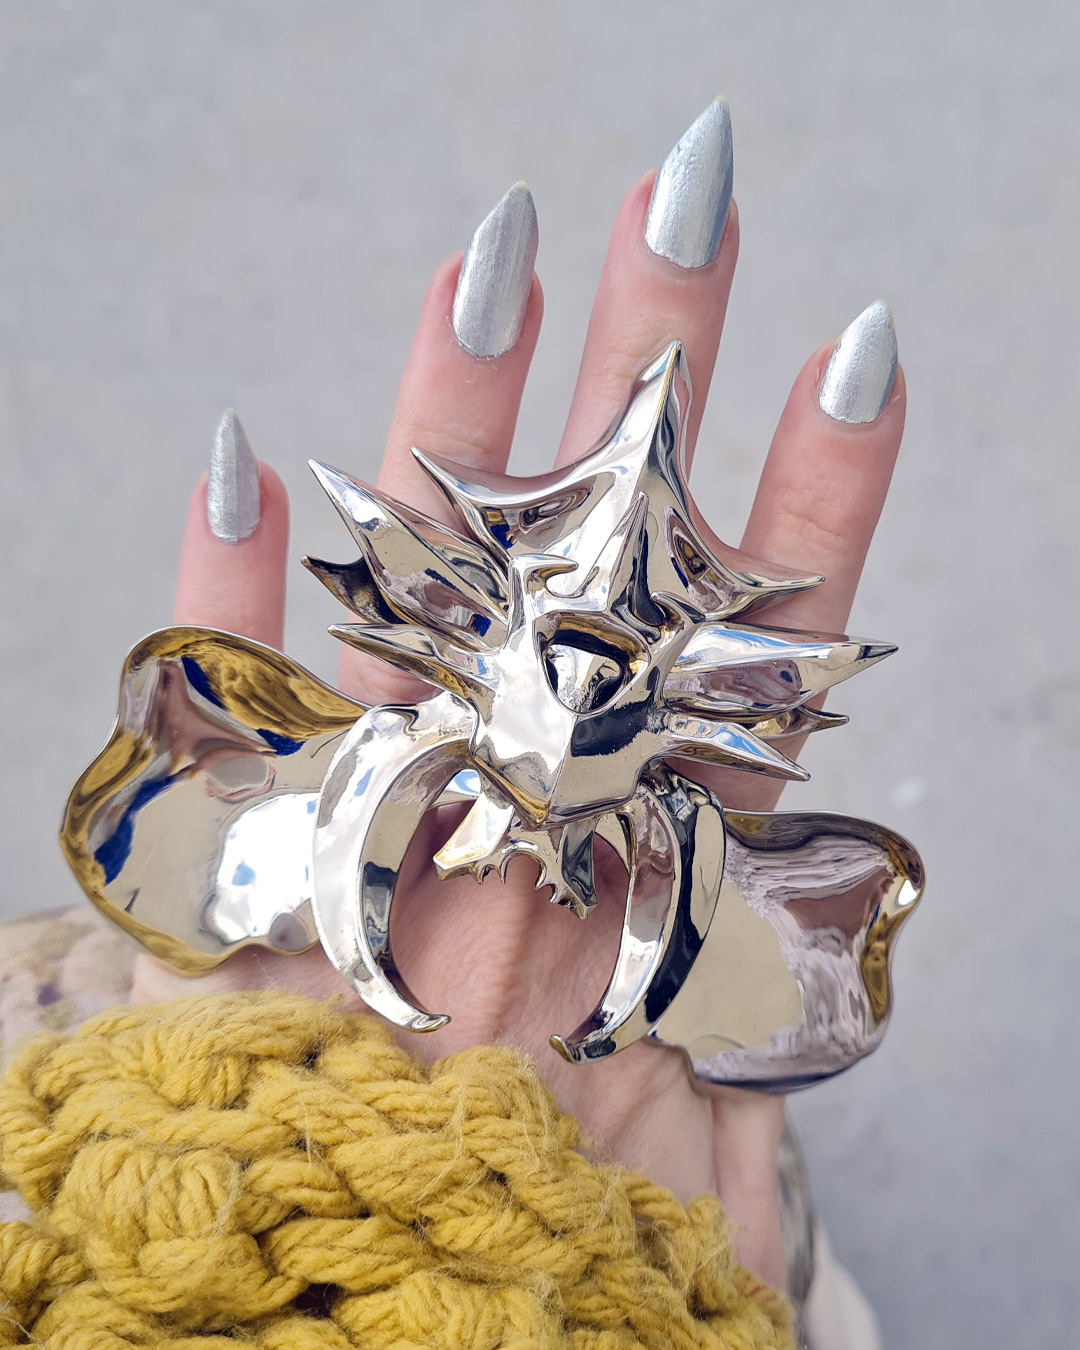 Nails by @thefashion.fold